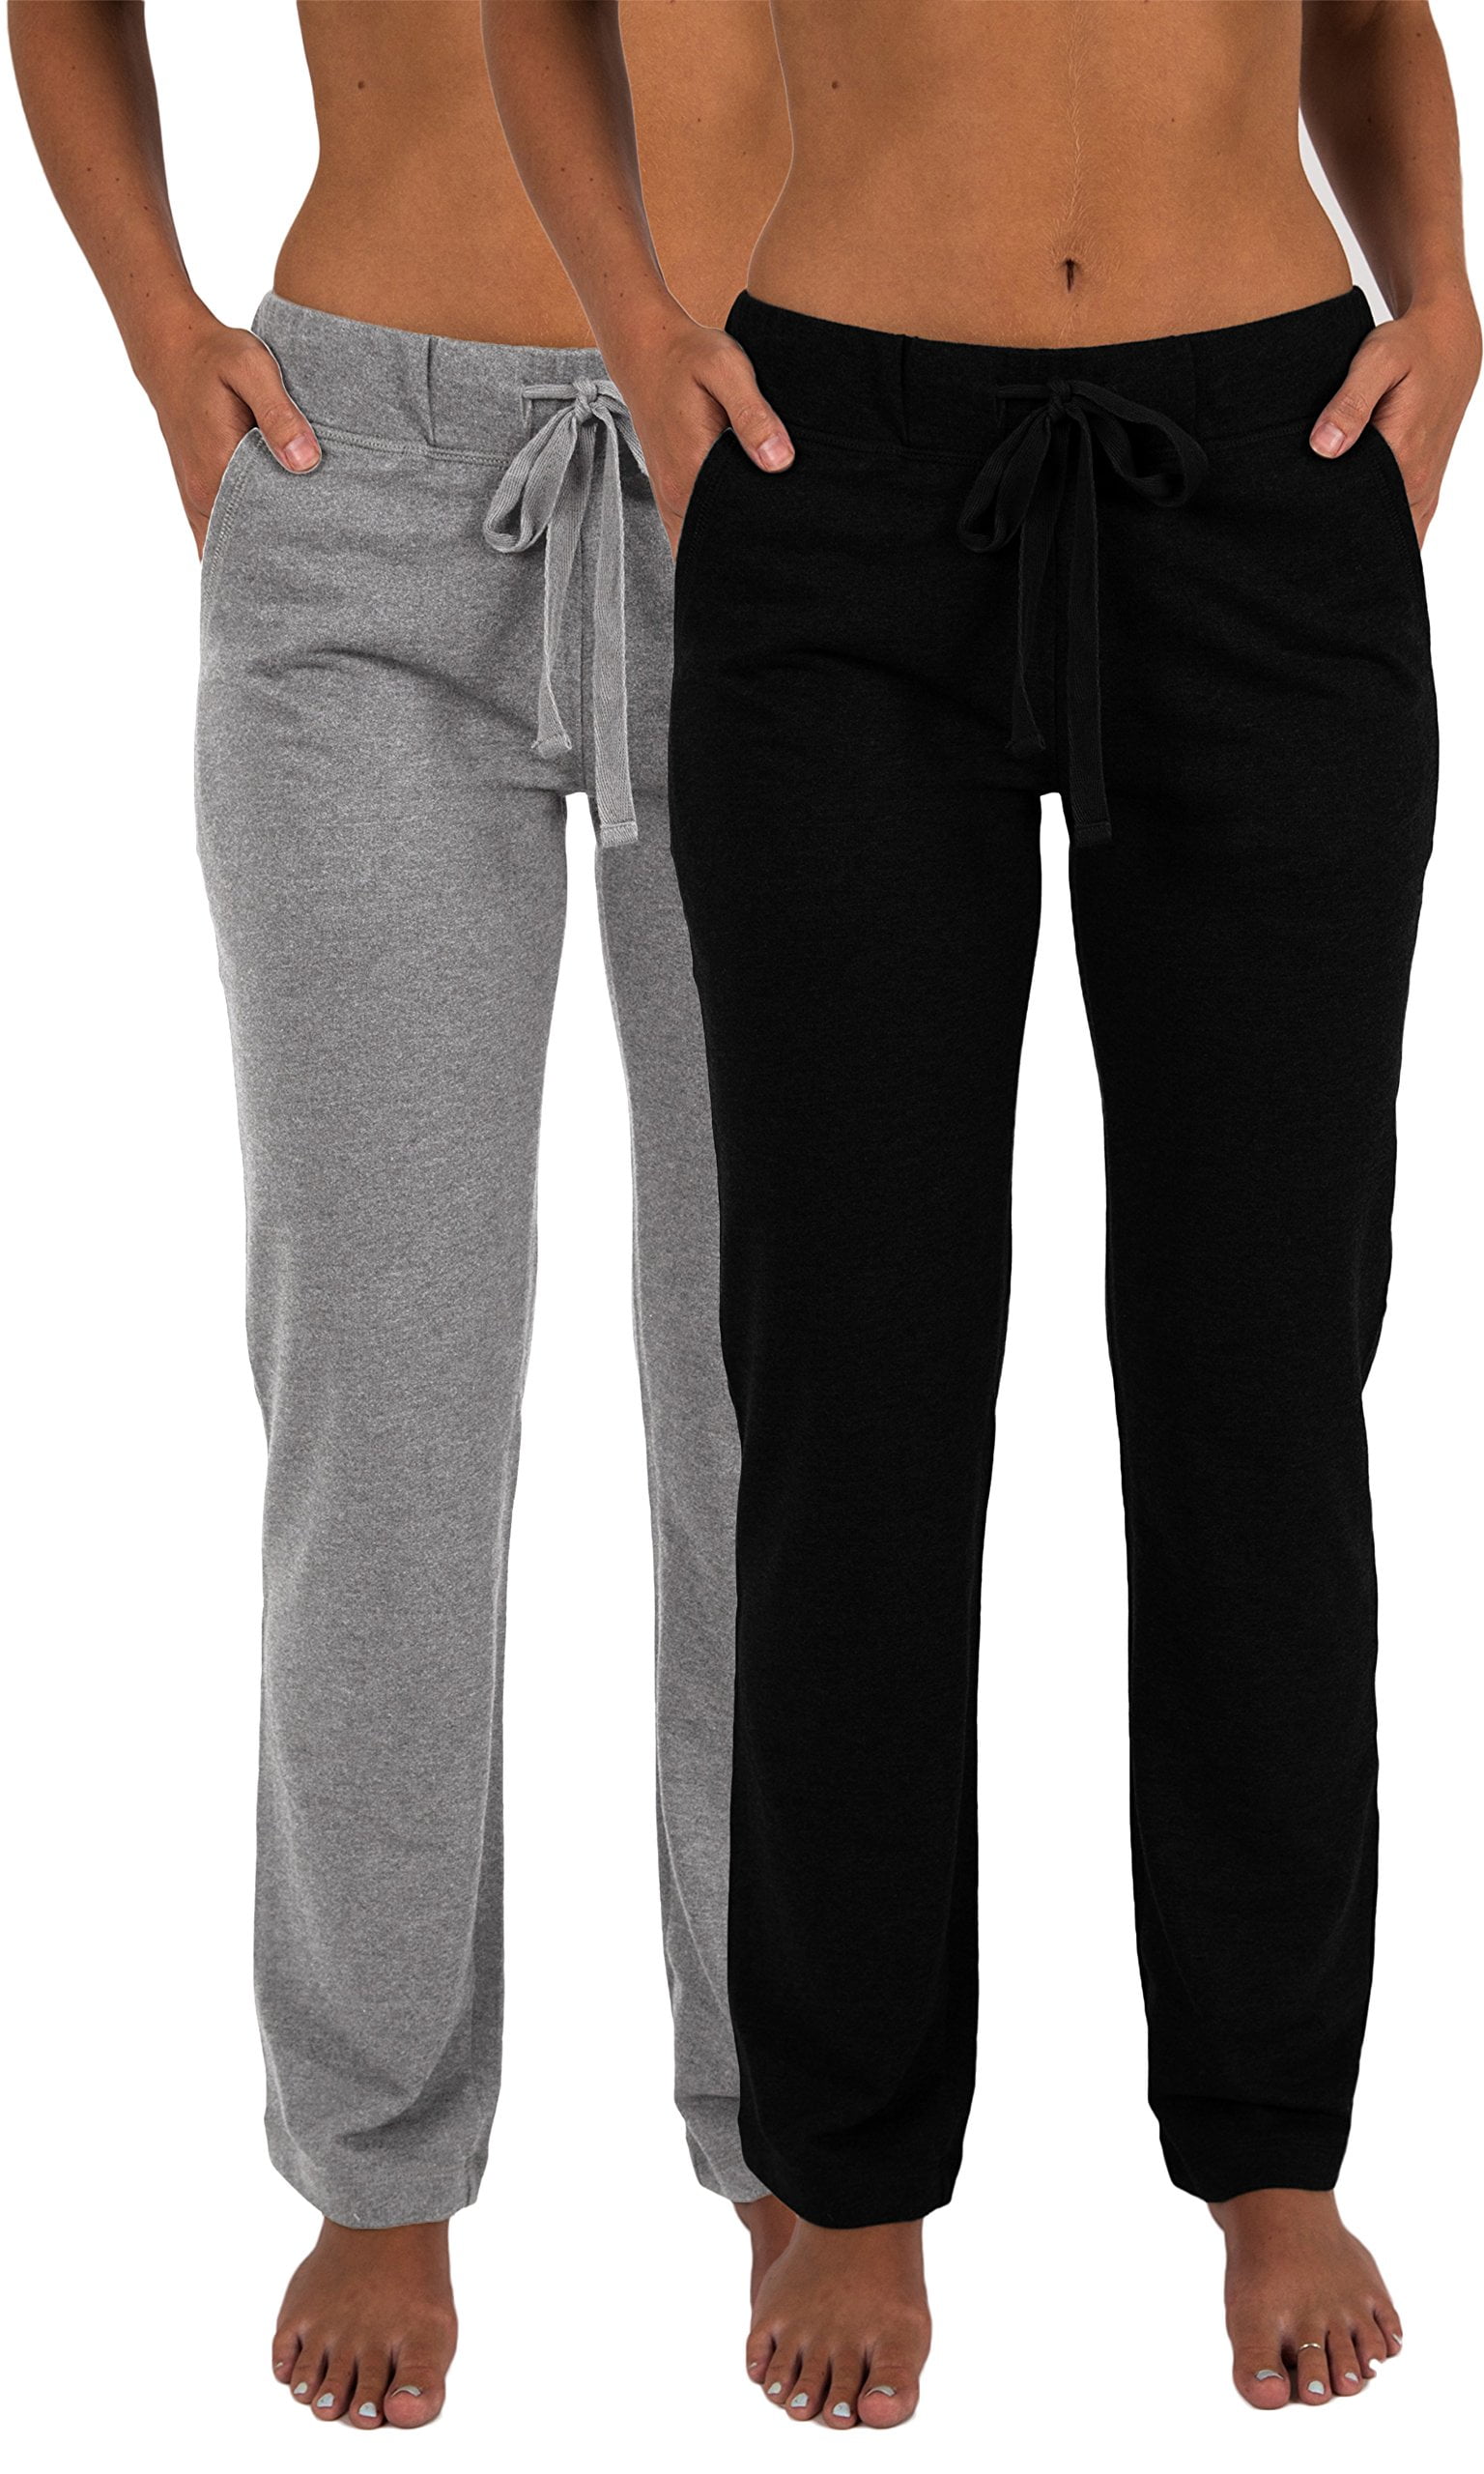 Sexy Basics Women's French Terry Pant - 2 Pack - Walmart.com